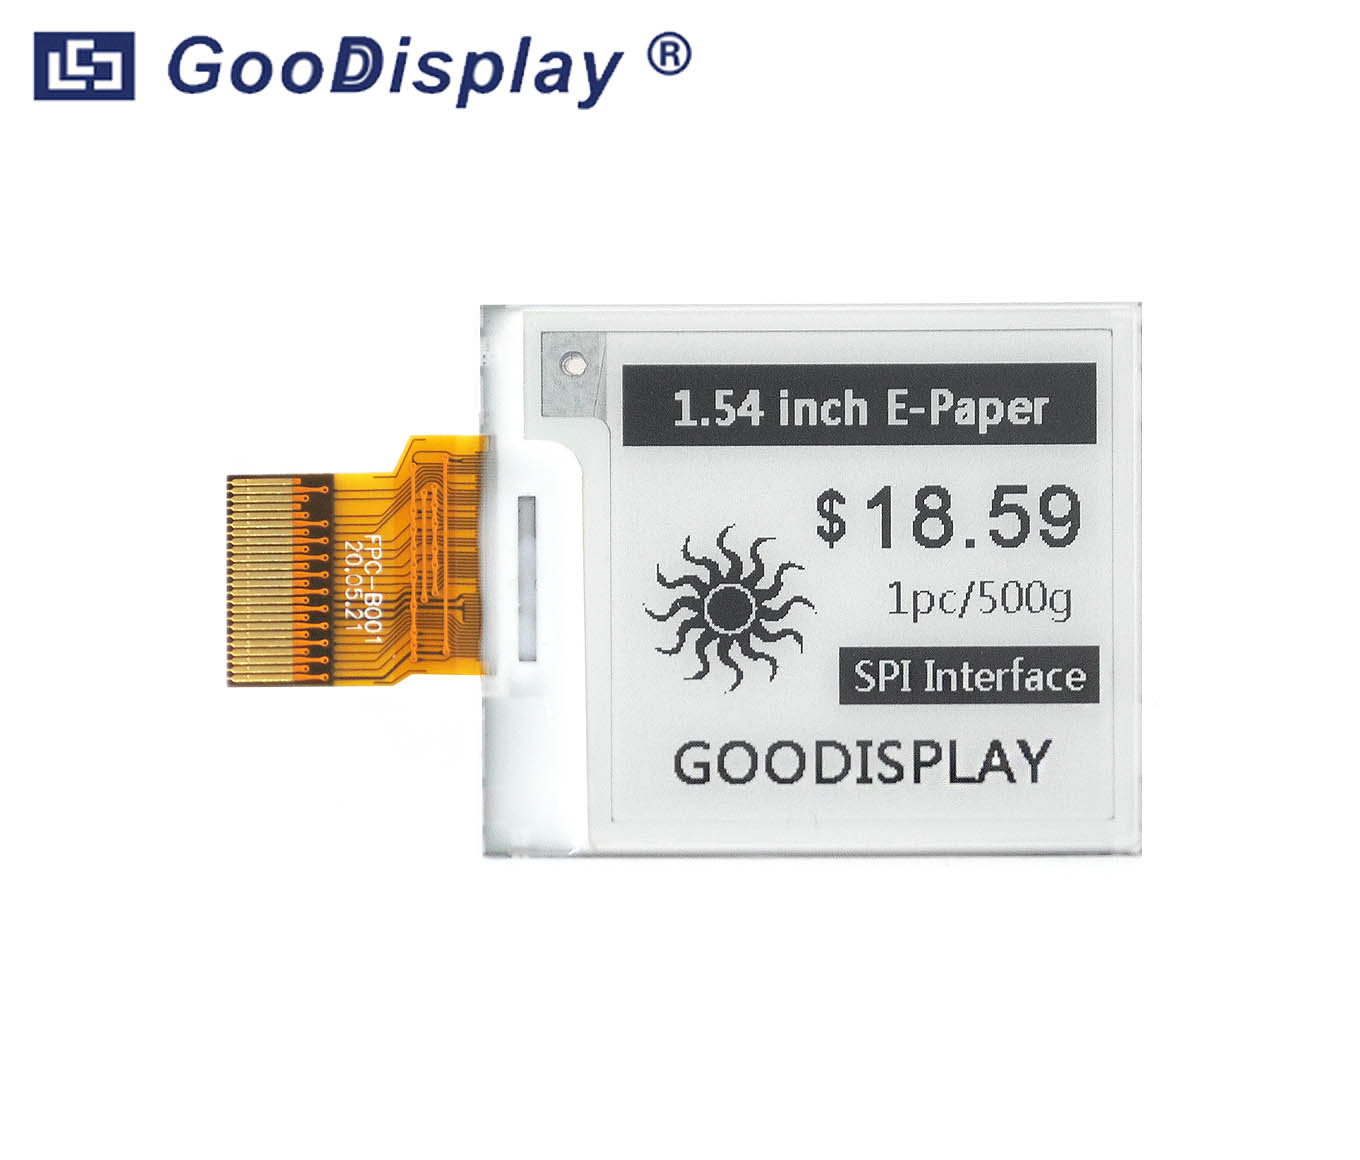 1.54 inch e paper display 200x200 high rate refresh, GDEY0154D67 